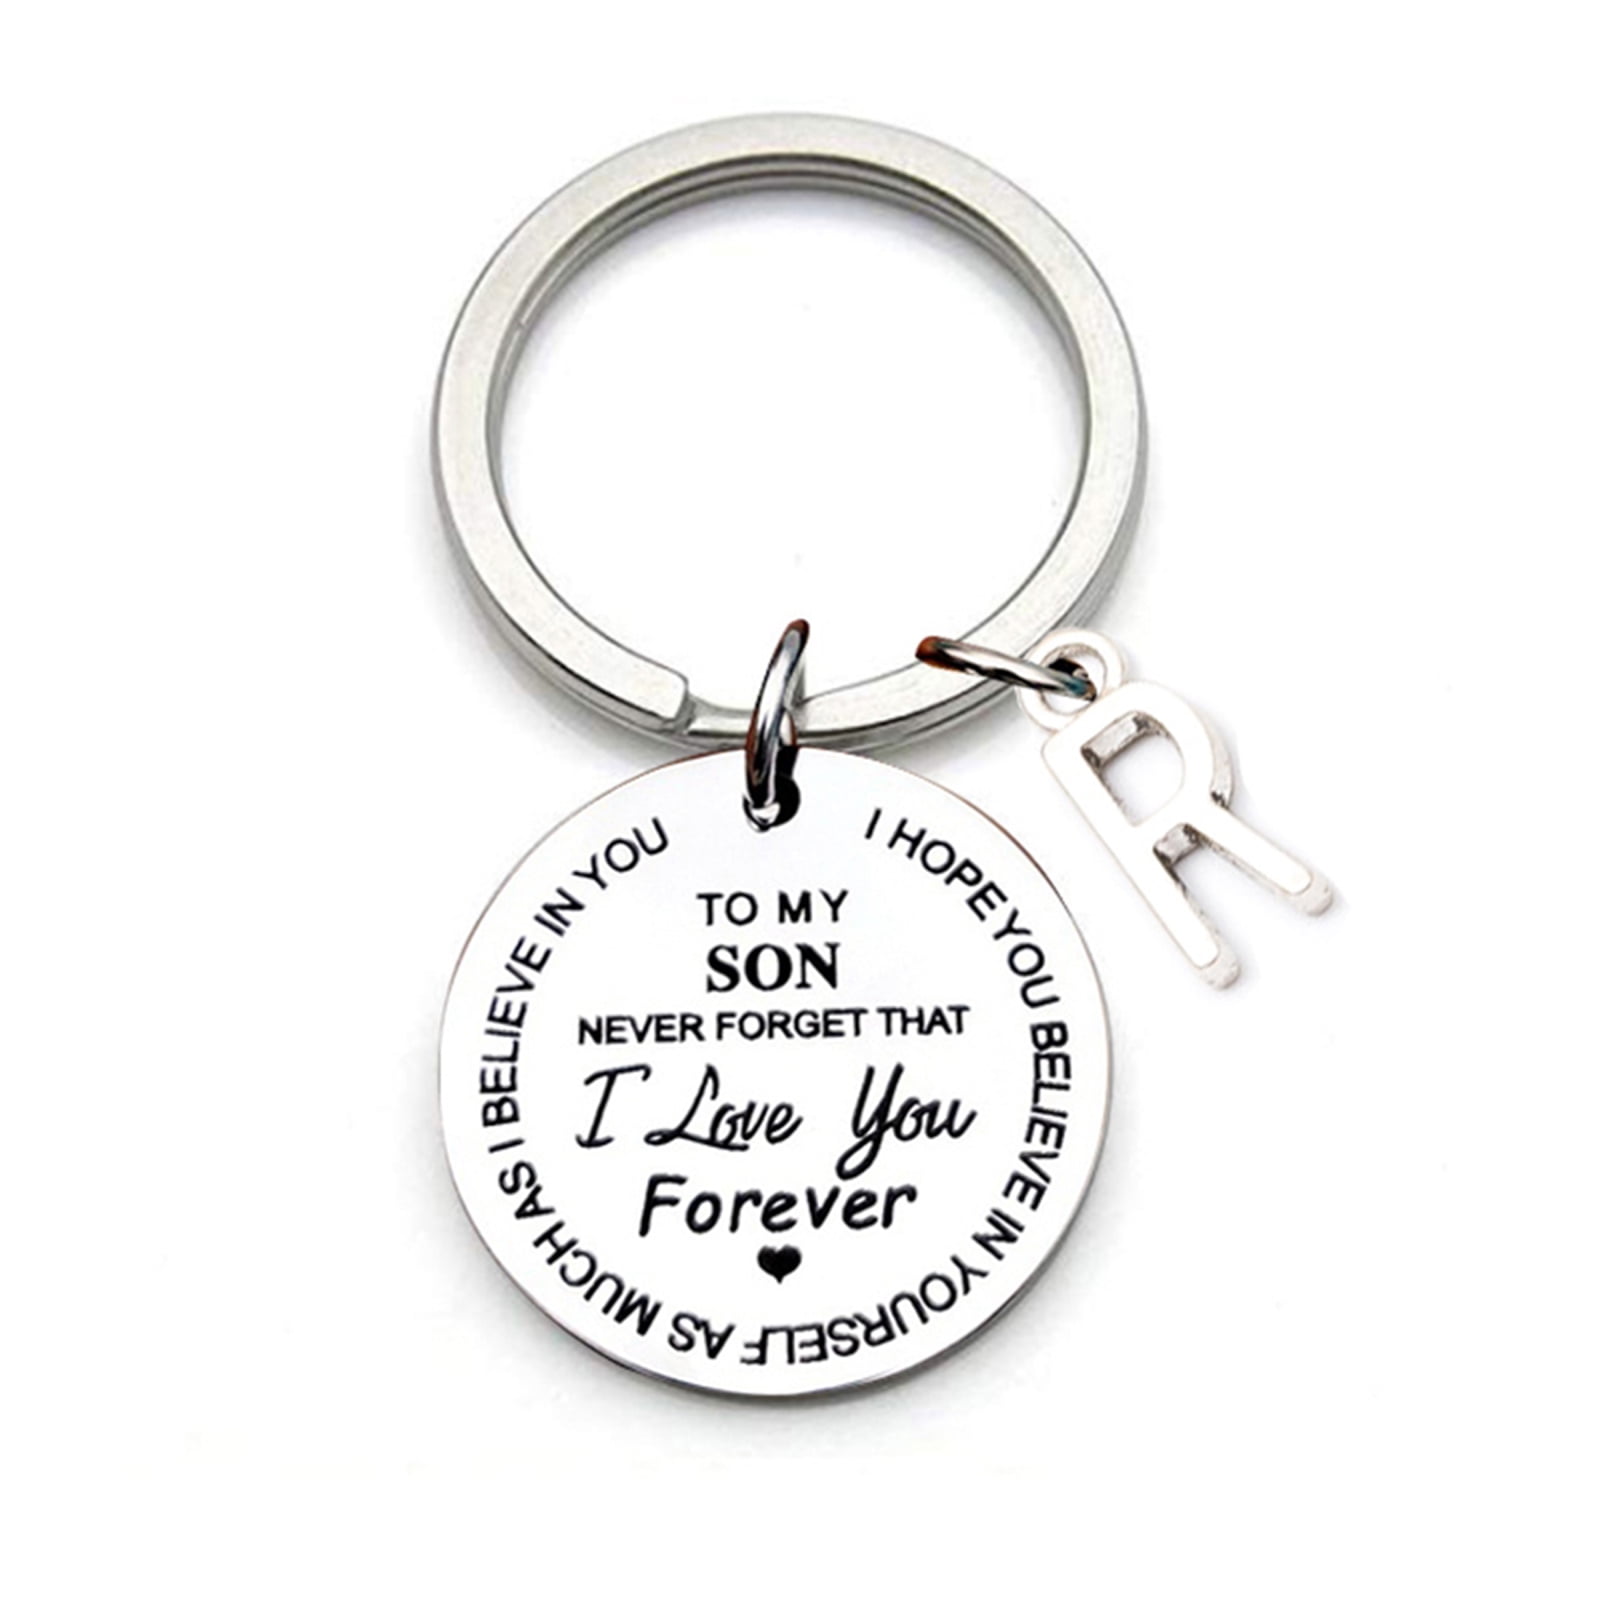 Stainless Steel Key Chain 49 The Love Between A Dad and Daughter is Forever 